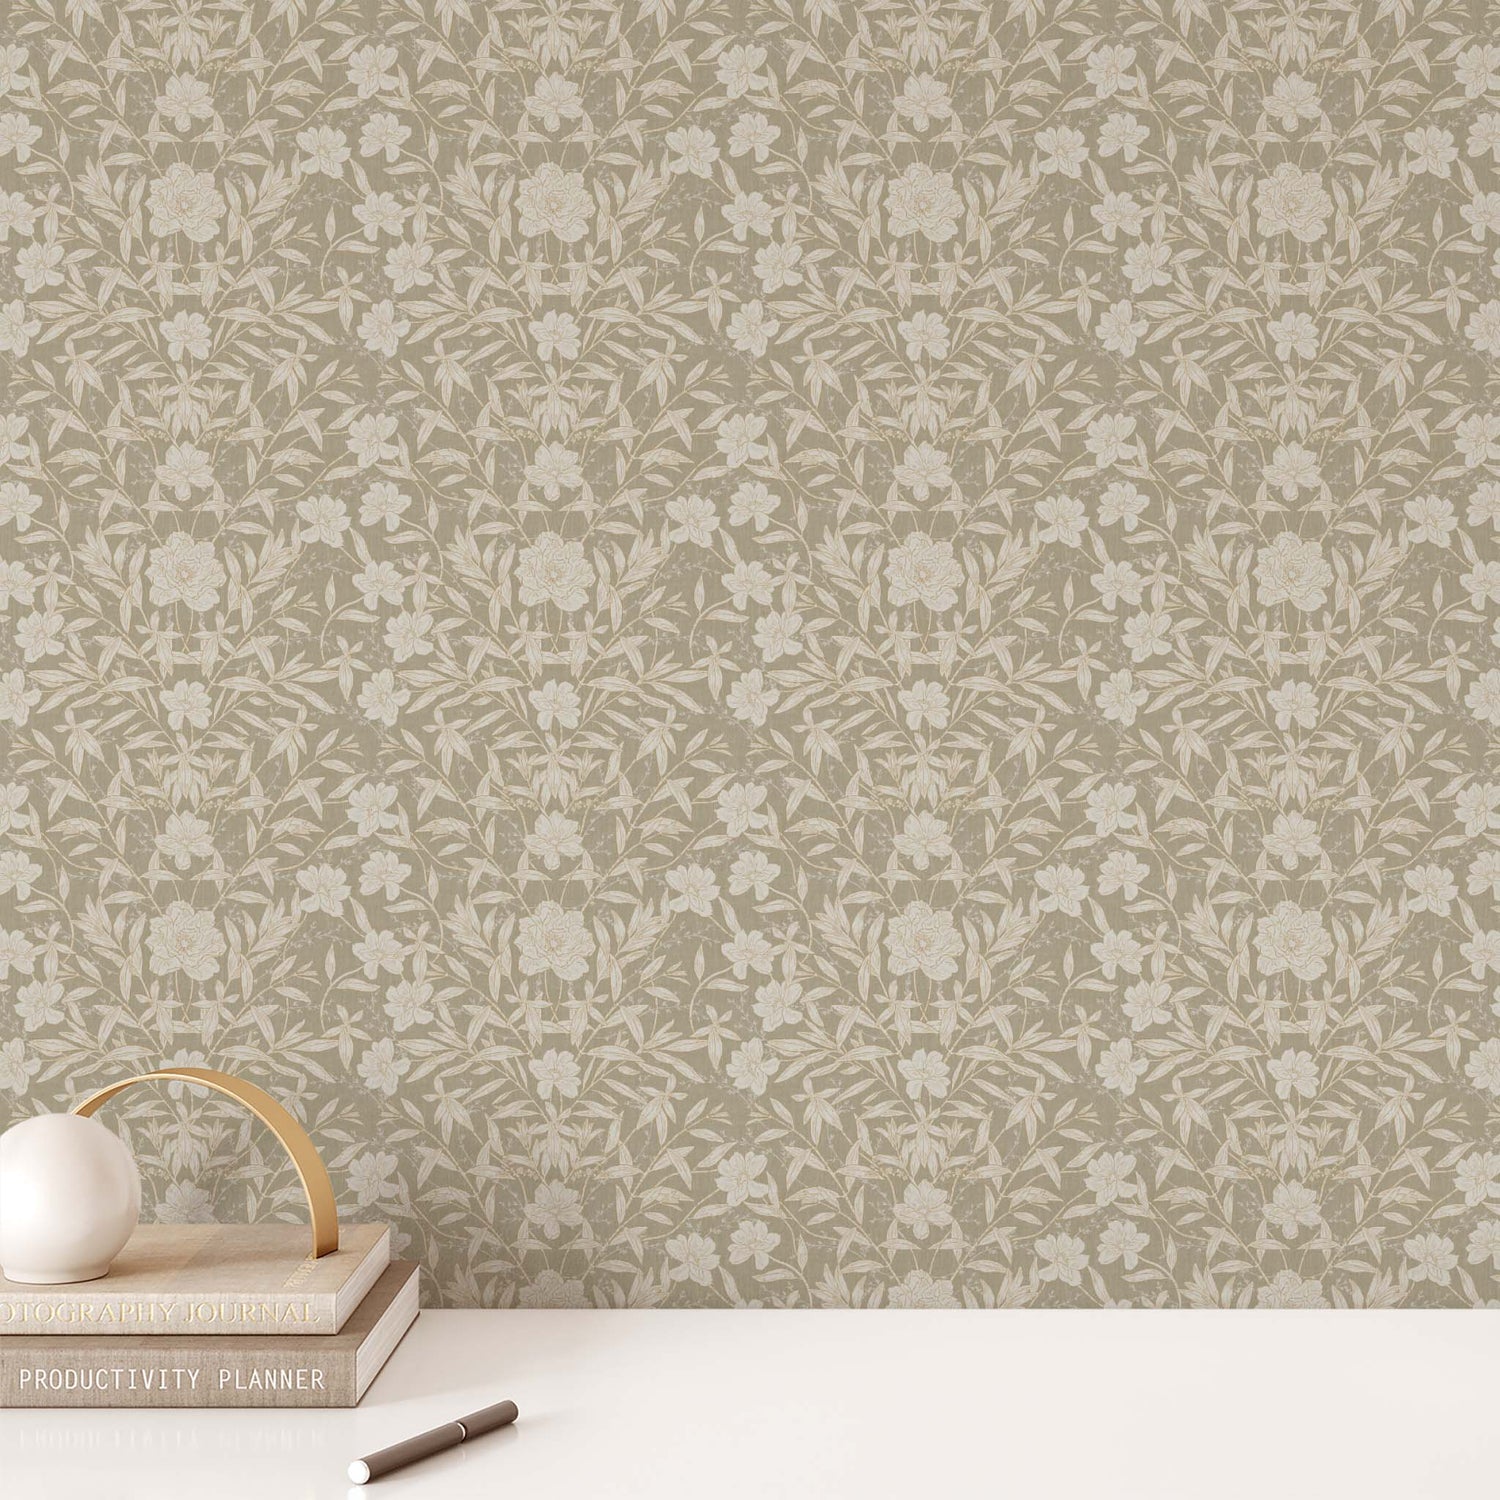 Our luxurious Peony Garden Wallpaper in Sage adds a majestic touch of sophistication to any space. Its distinctive classic peonies are guaranteed to add a sense of elegance to any wall. 